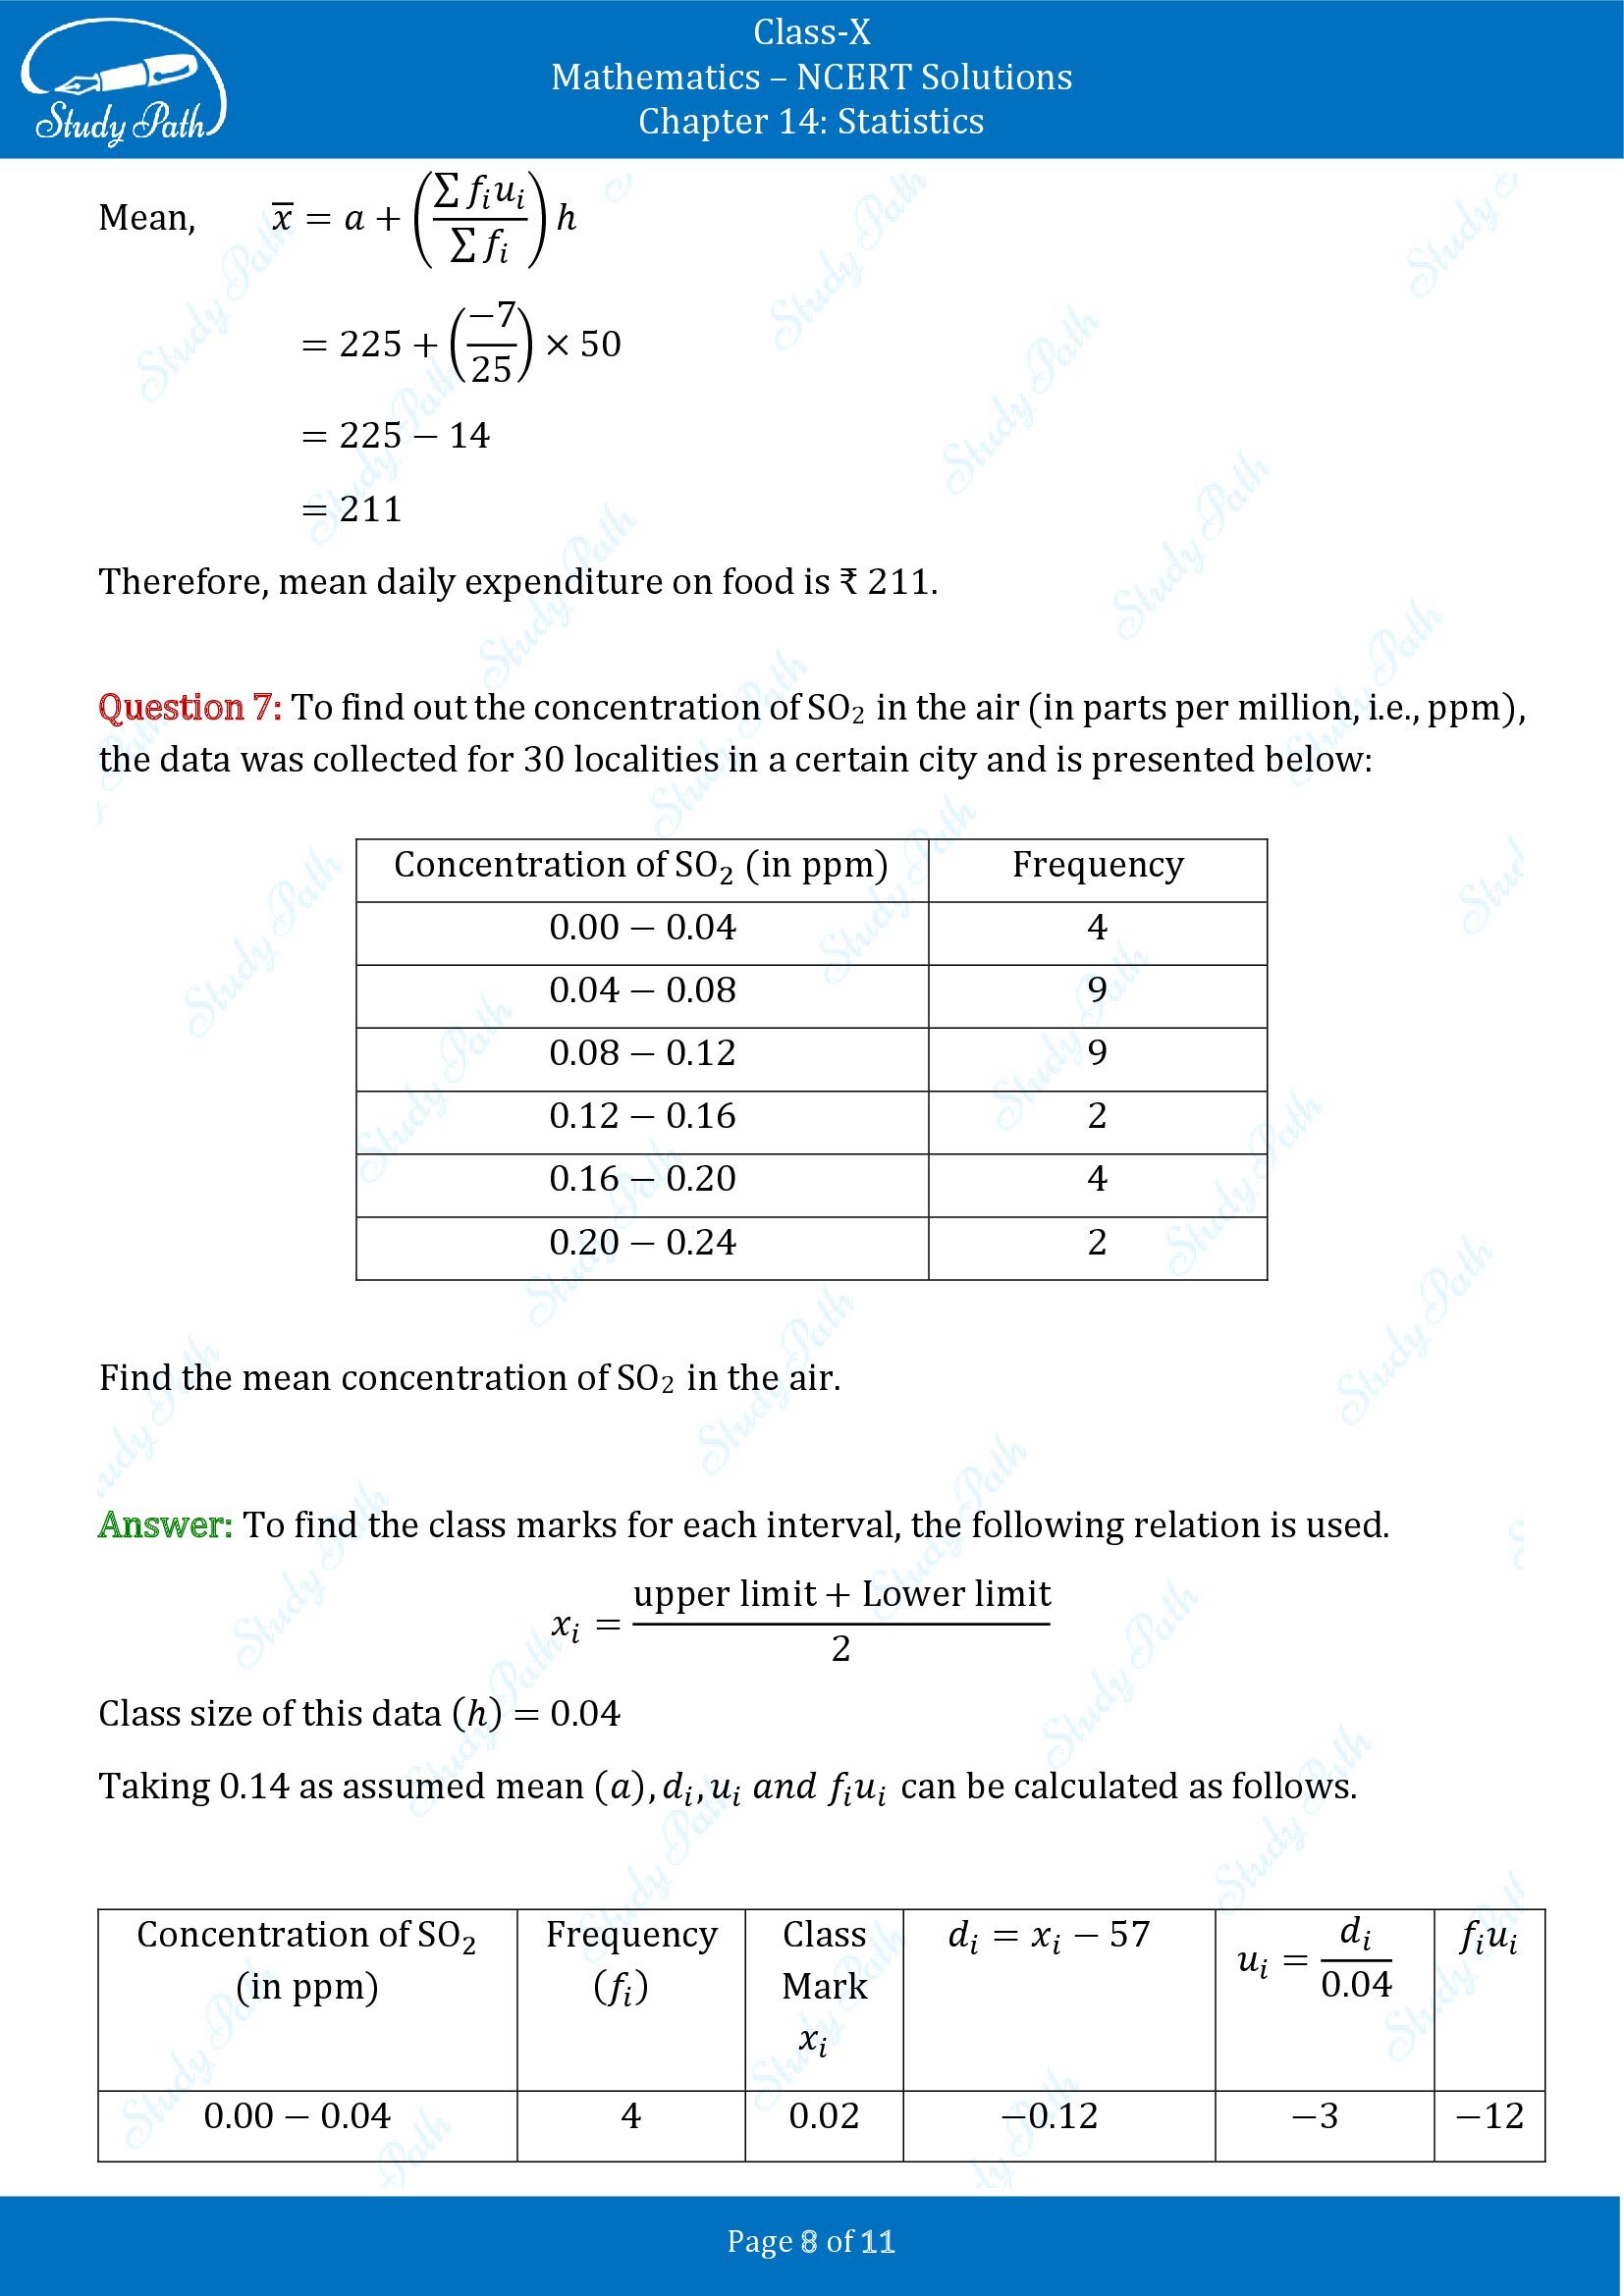 NCERT Solutions for Class 10 Maths Chapter 14 Statistics Exercise 14.1 00008